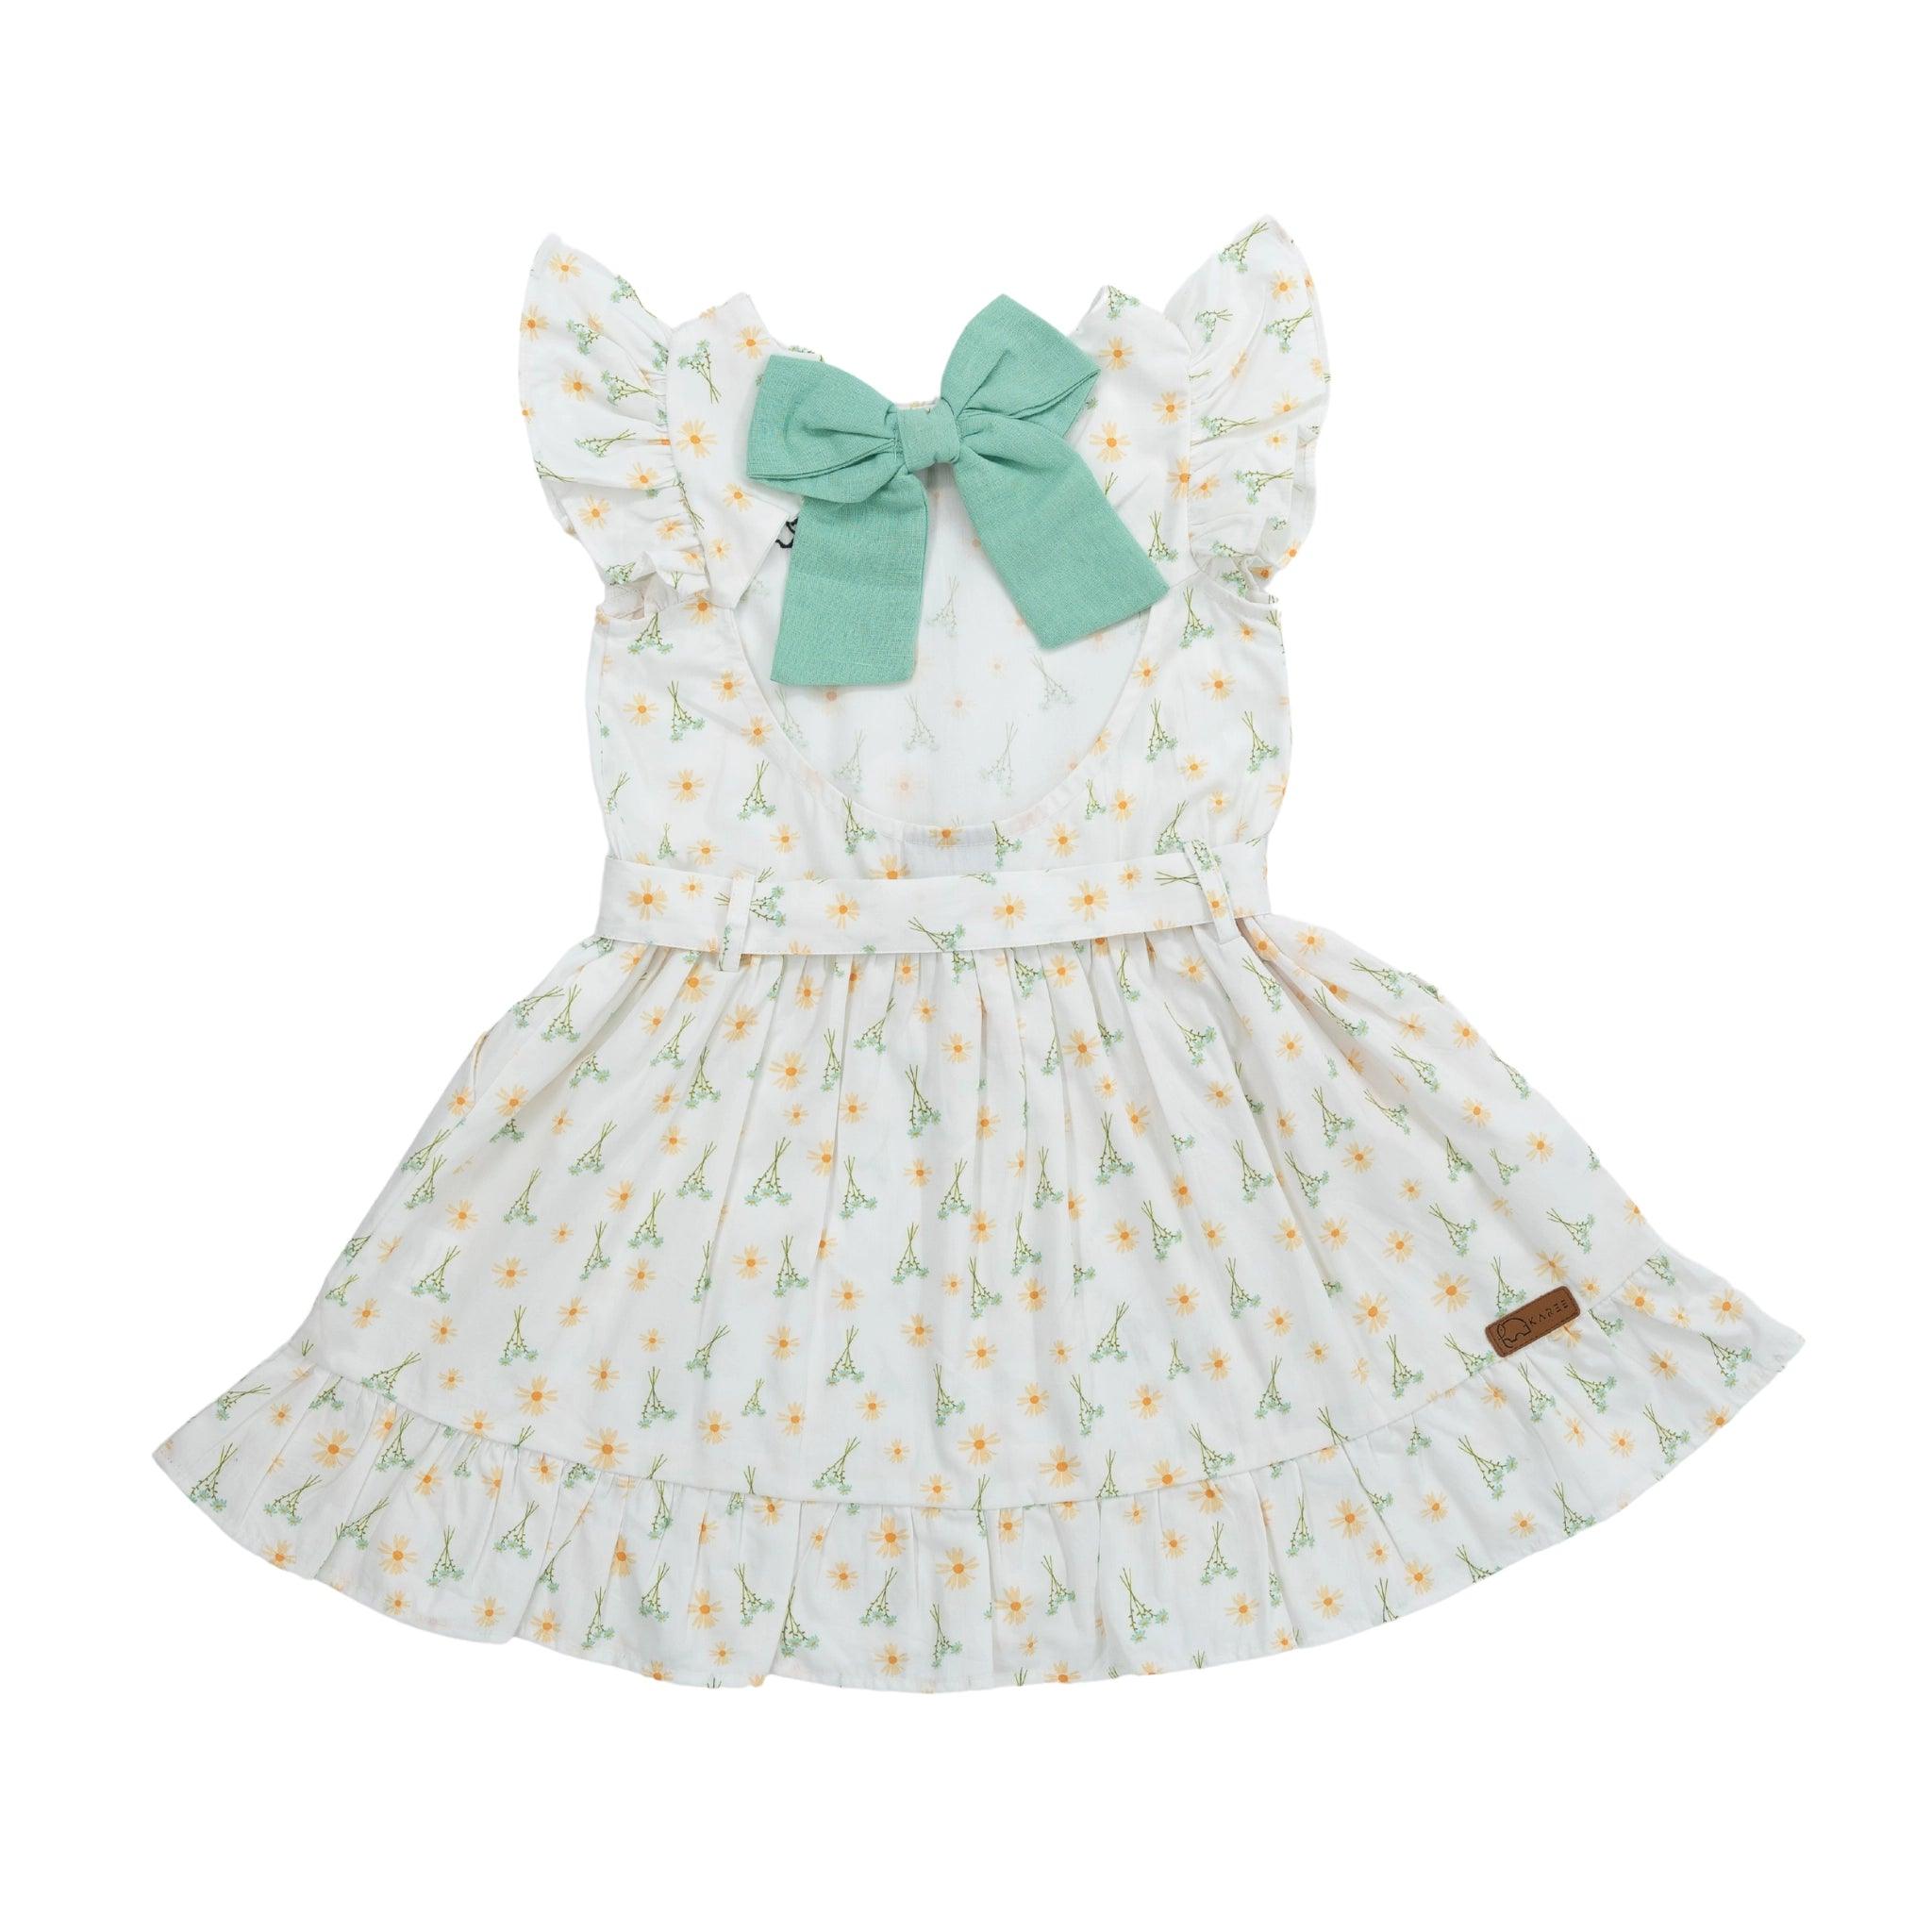 Karee Petite Blossom Cotton Dress in Smoked Pearl: White children's dress with green bow and floral pattern crafted from high-quality cotton, isolated on a white background.